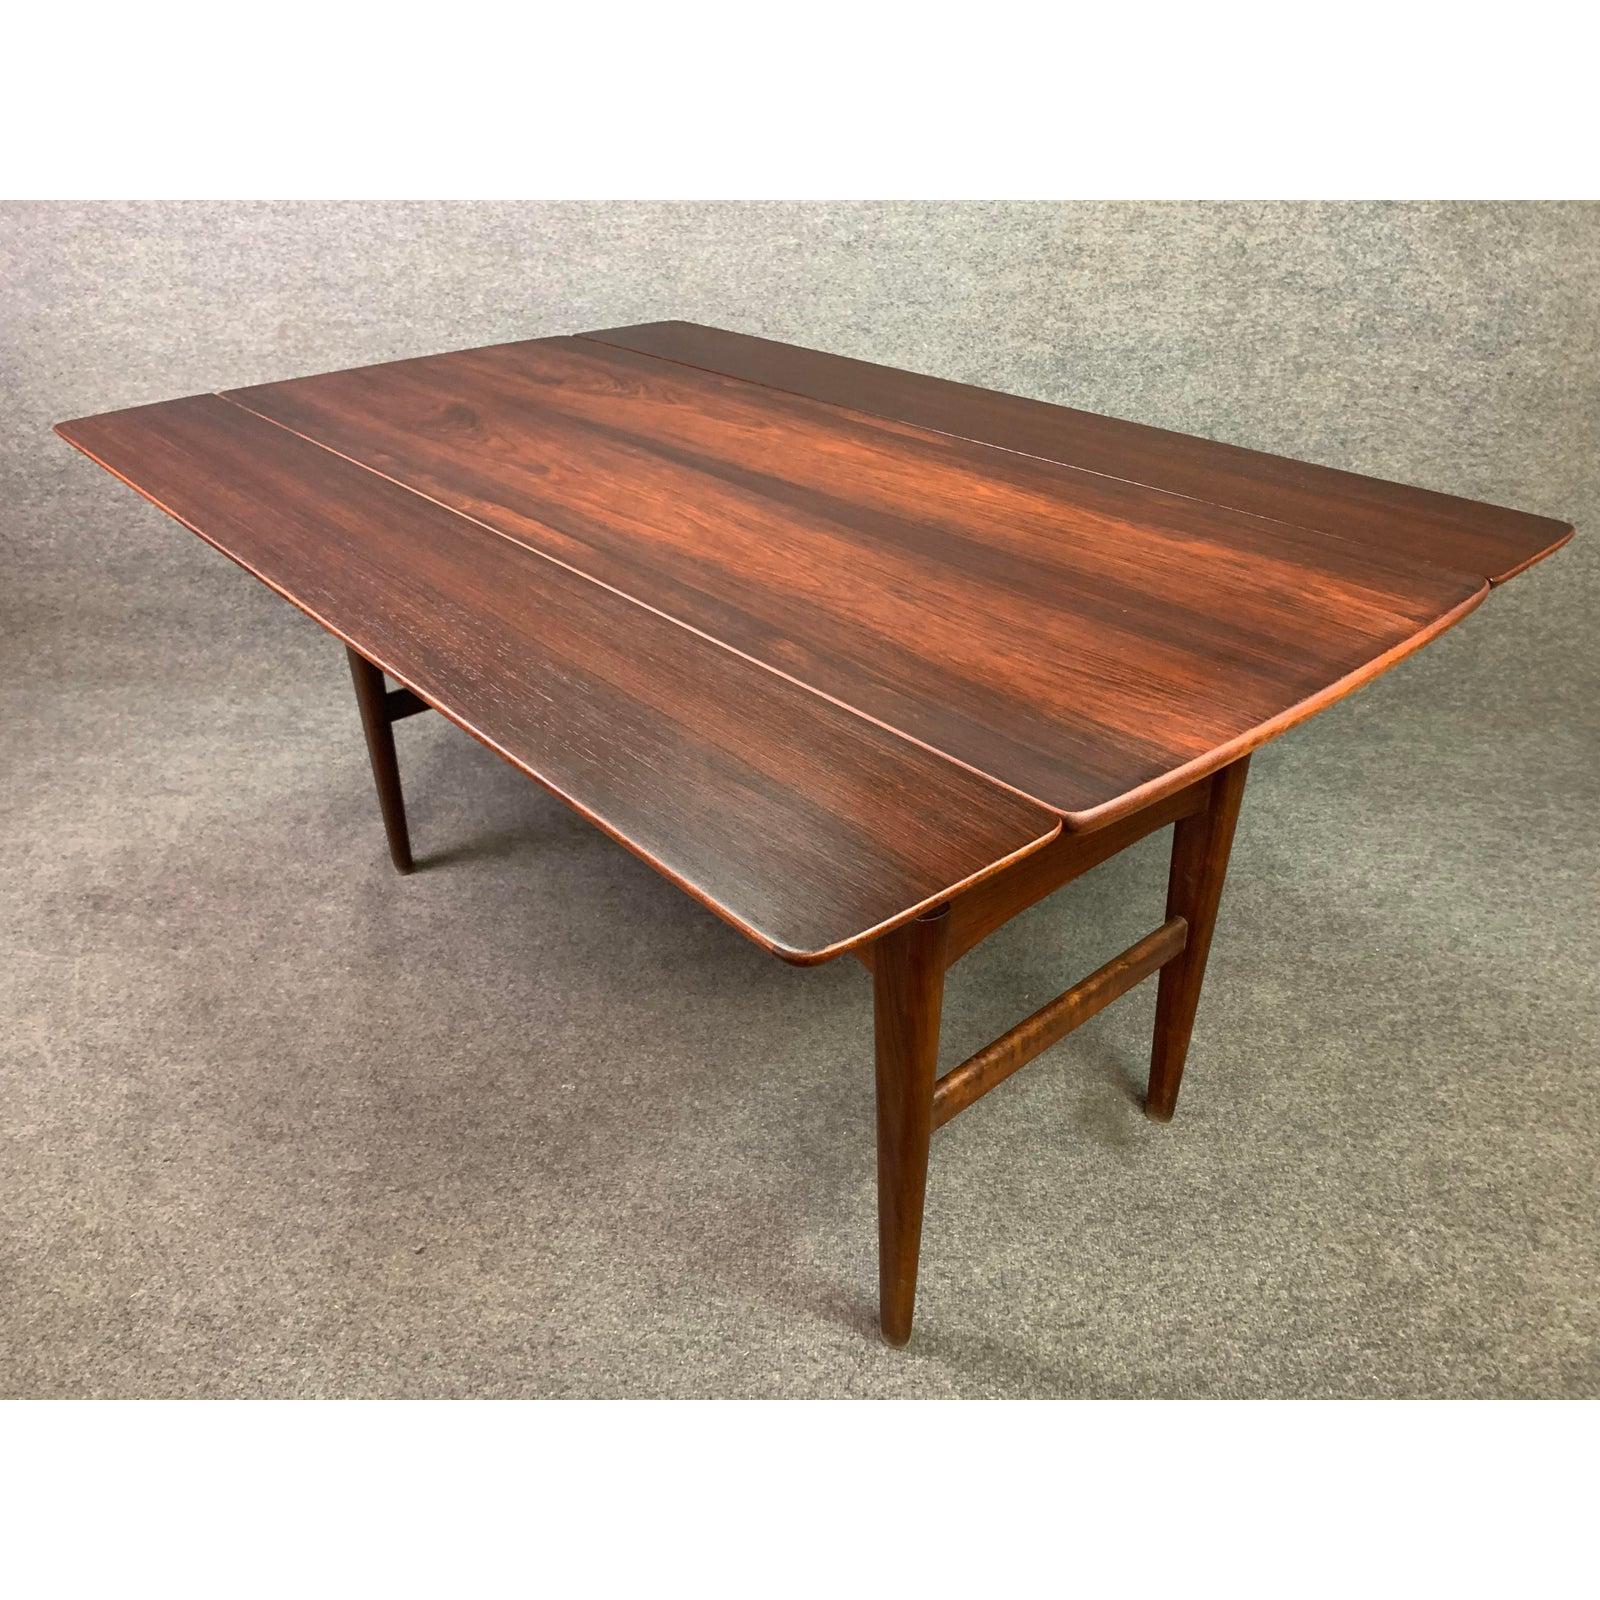 RESERVED FOR NOA: Vintage Danish Mid-Century Modern Rosewood Elevator Table 2